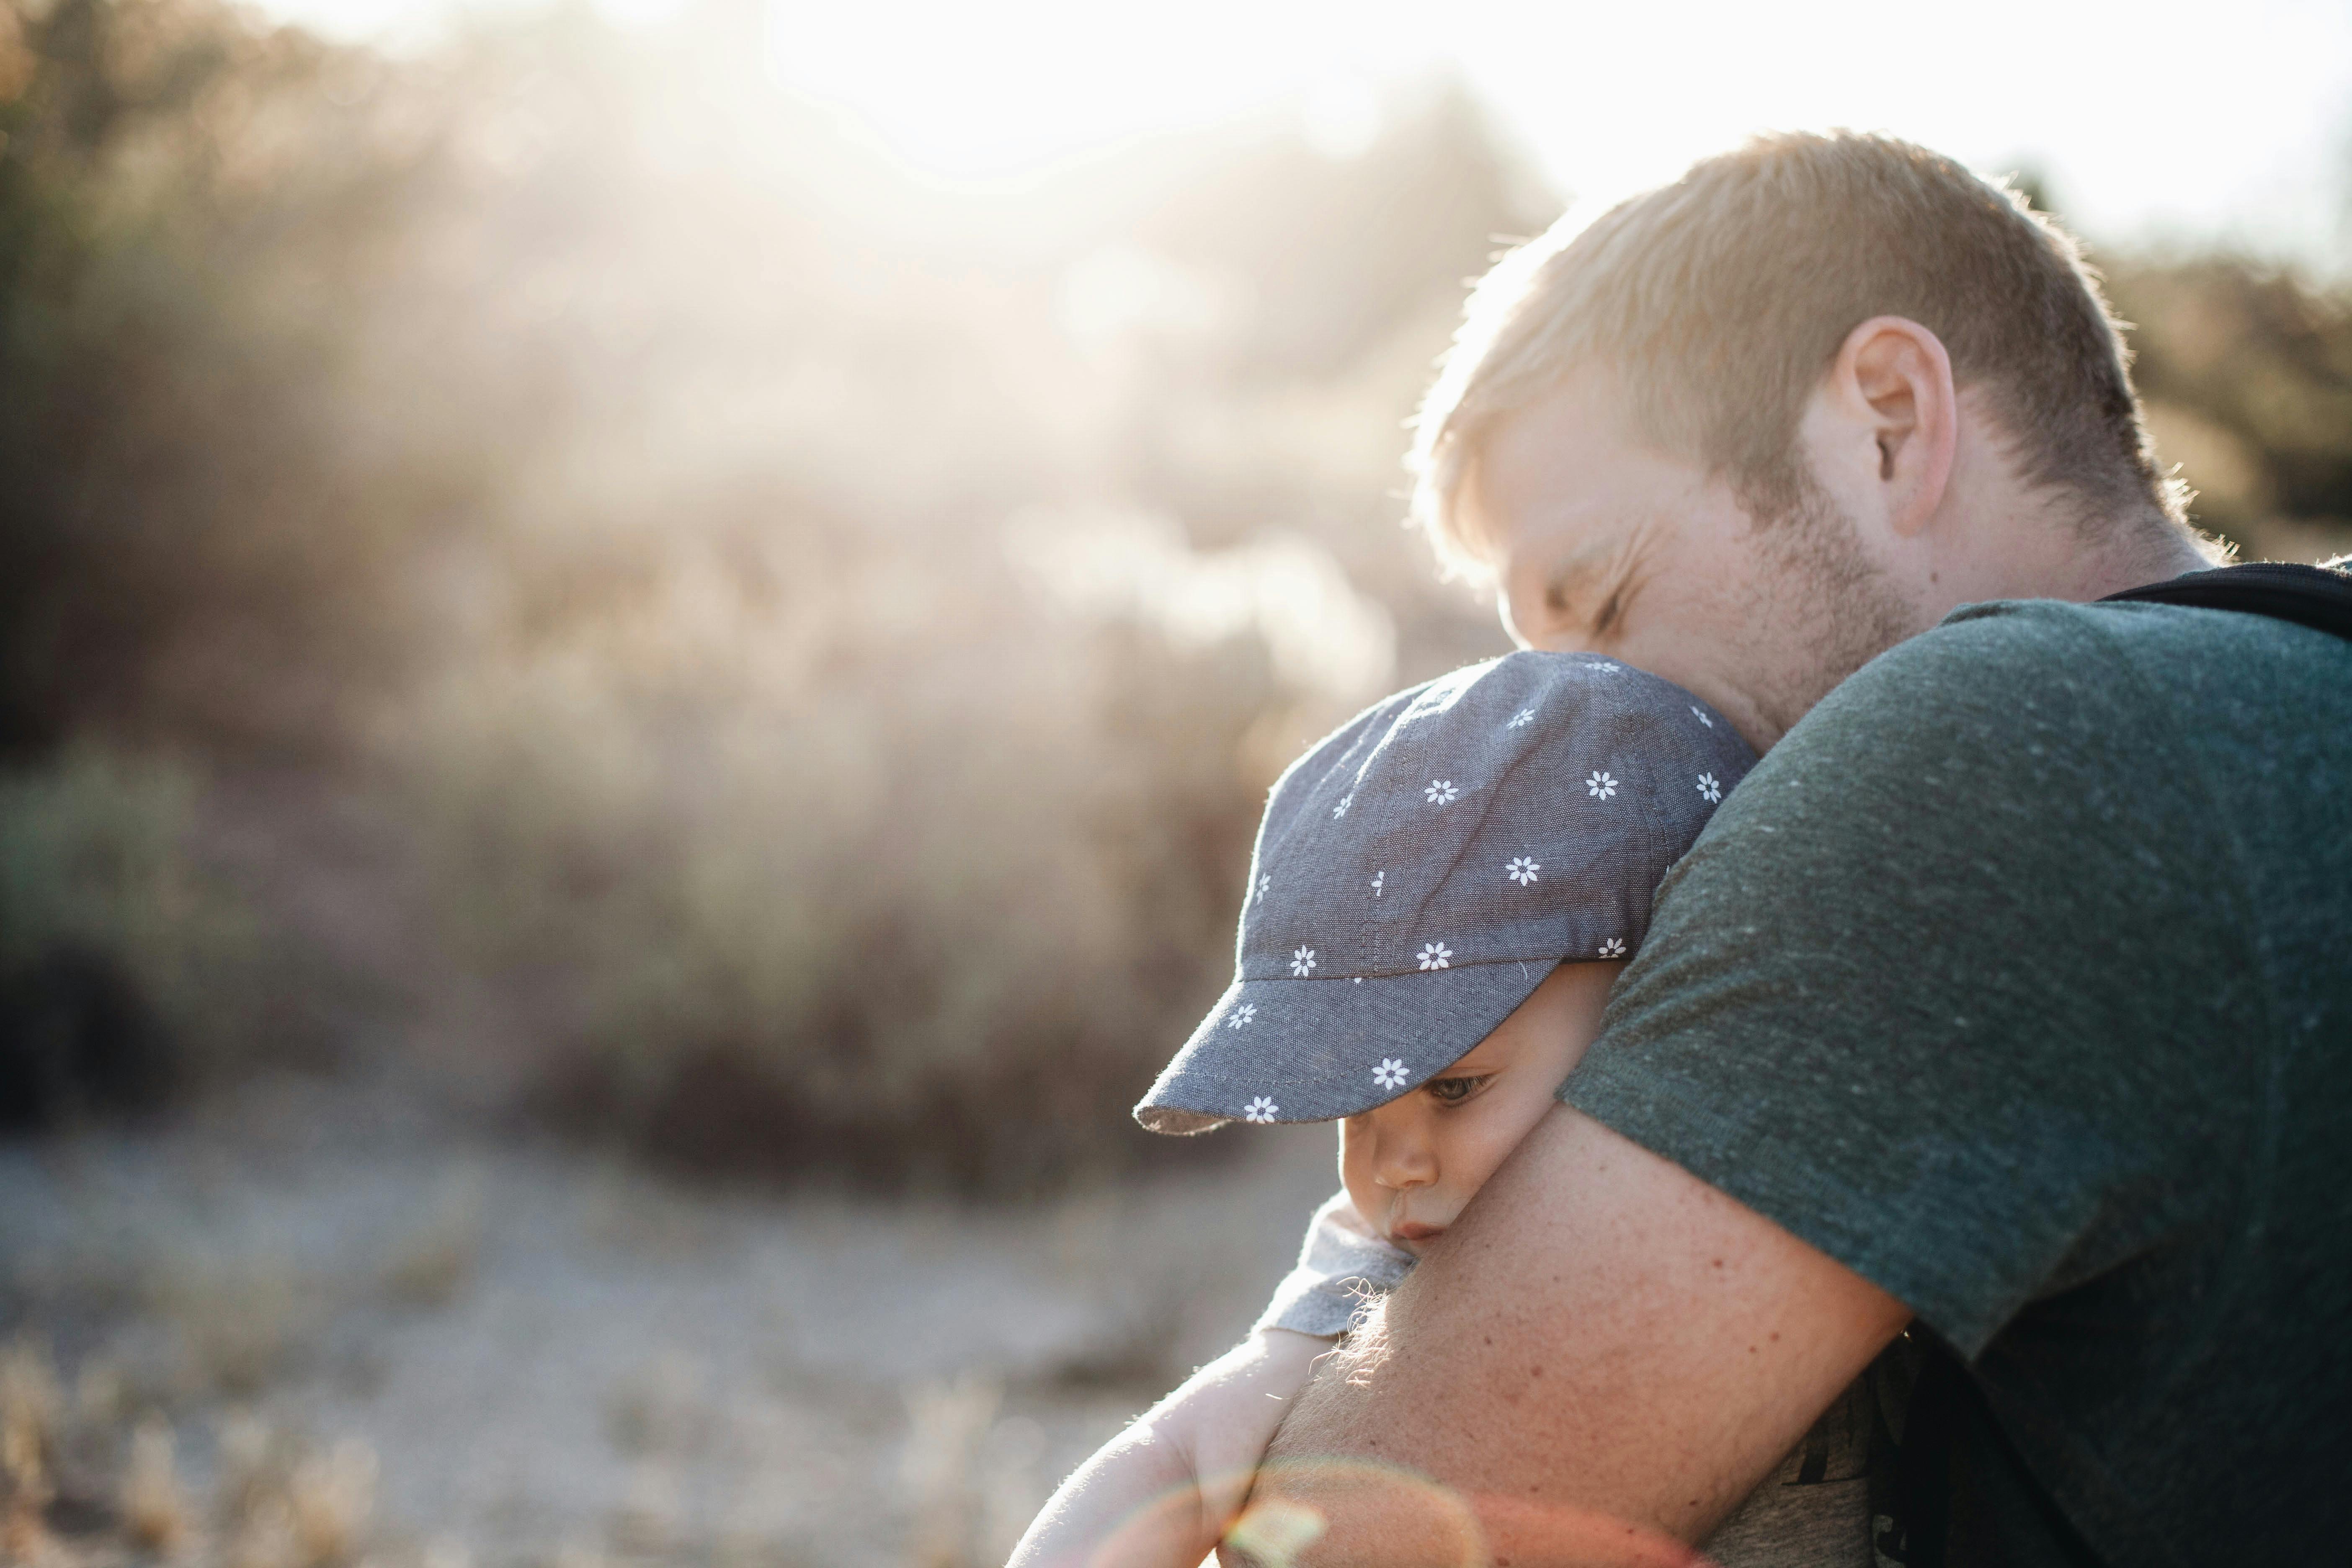 A father hugging his baby | Source: Pexels